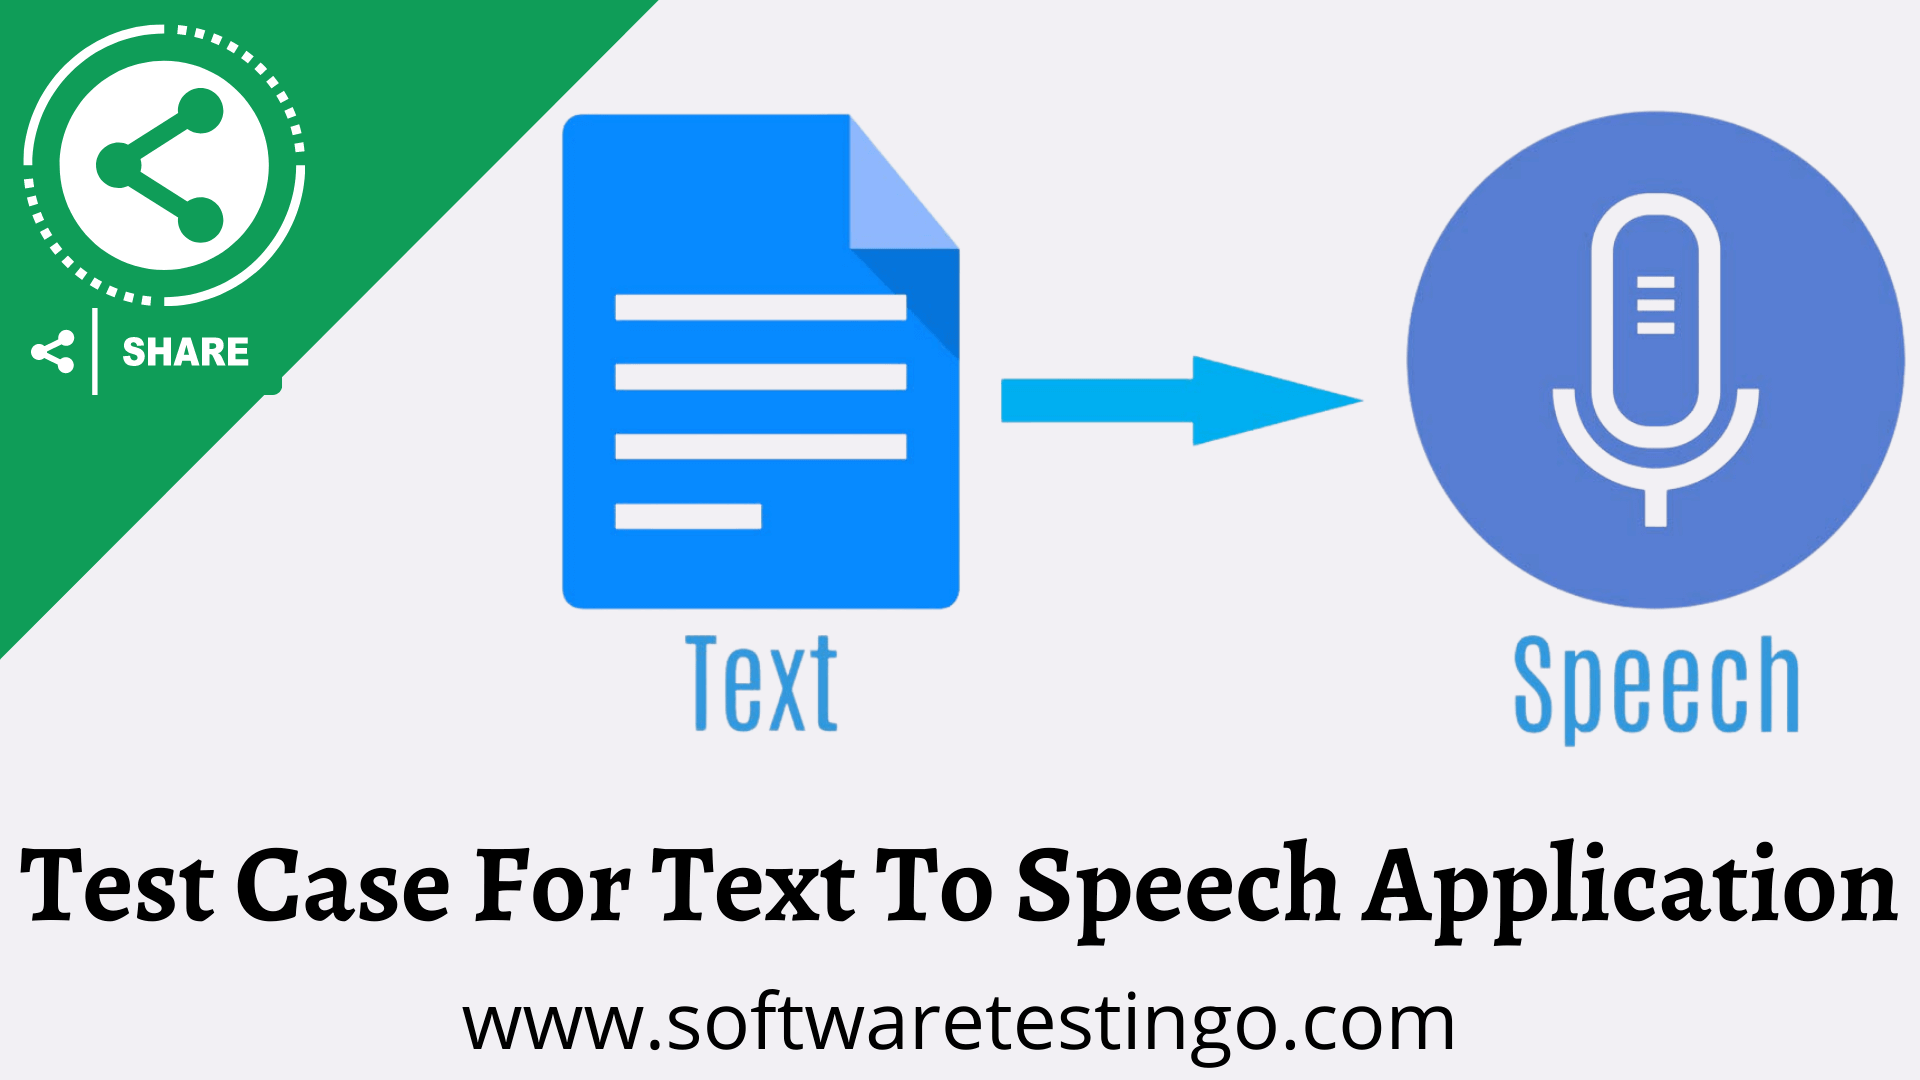 Test Case For Text To Speech Application